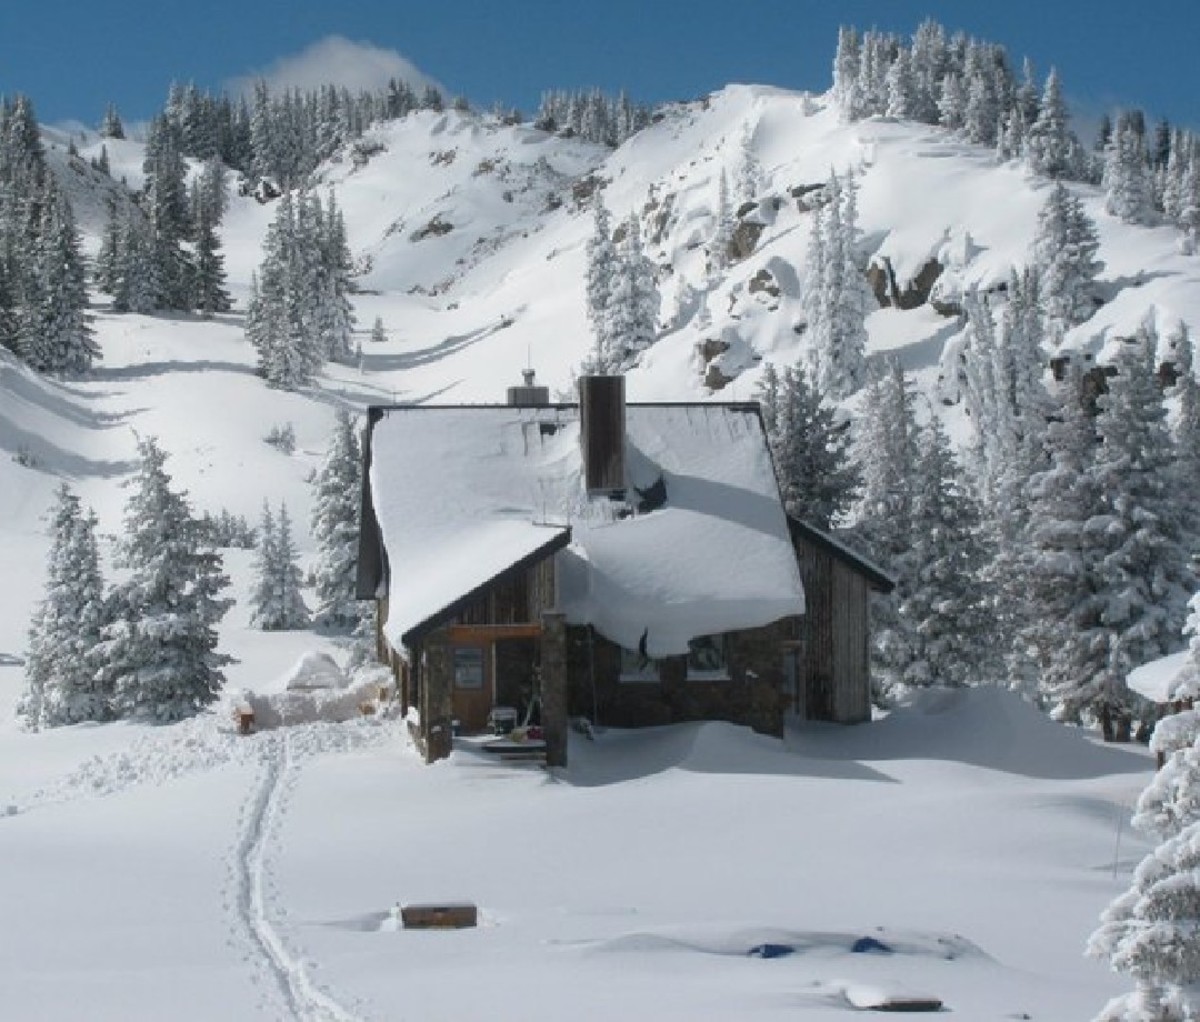 10th Mountain Division's Fowler/Hilliard Hut perched on a snowy mountainside in Colorado